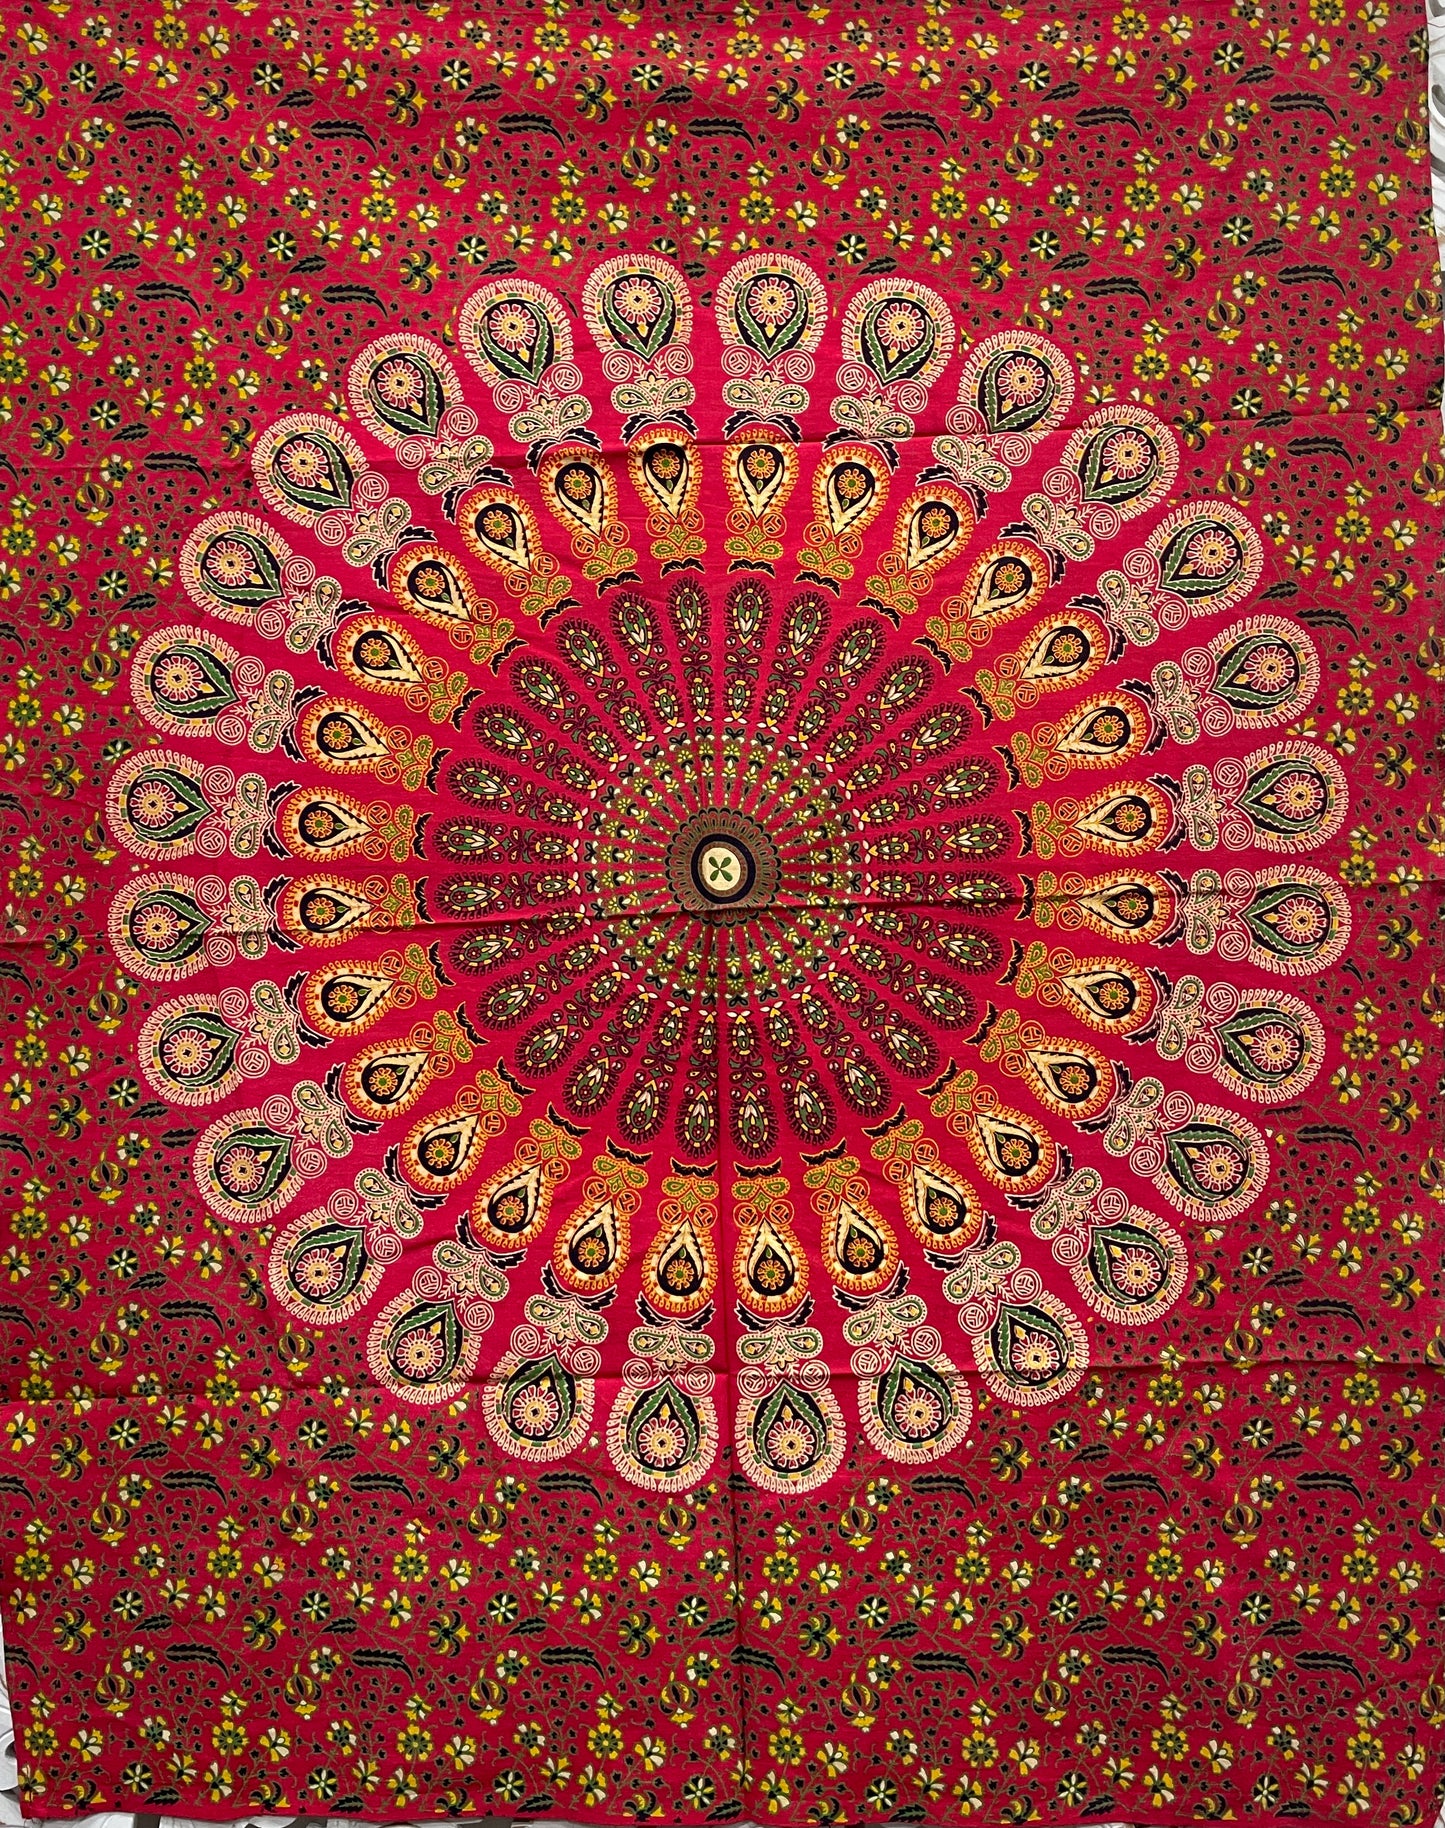 Hand printed Mandala Fabric Poster Tapestries- 7 Colors Available